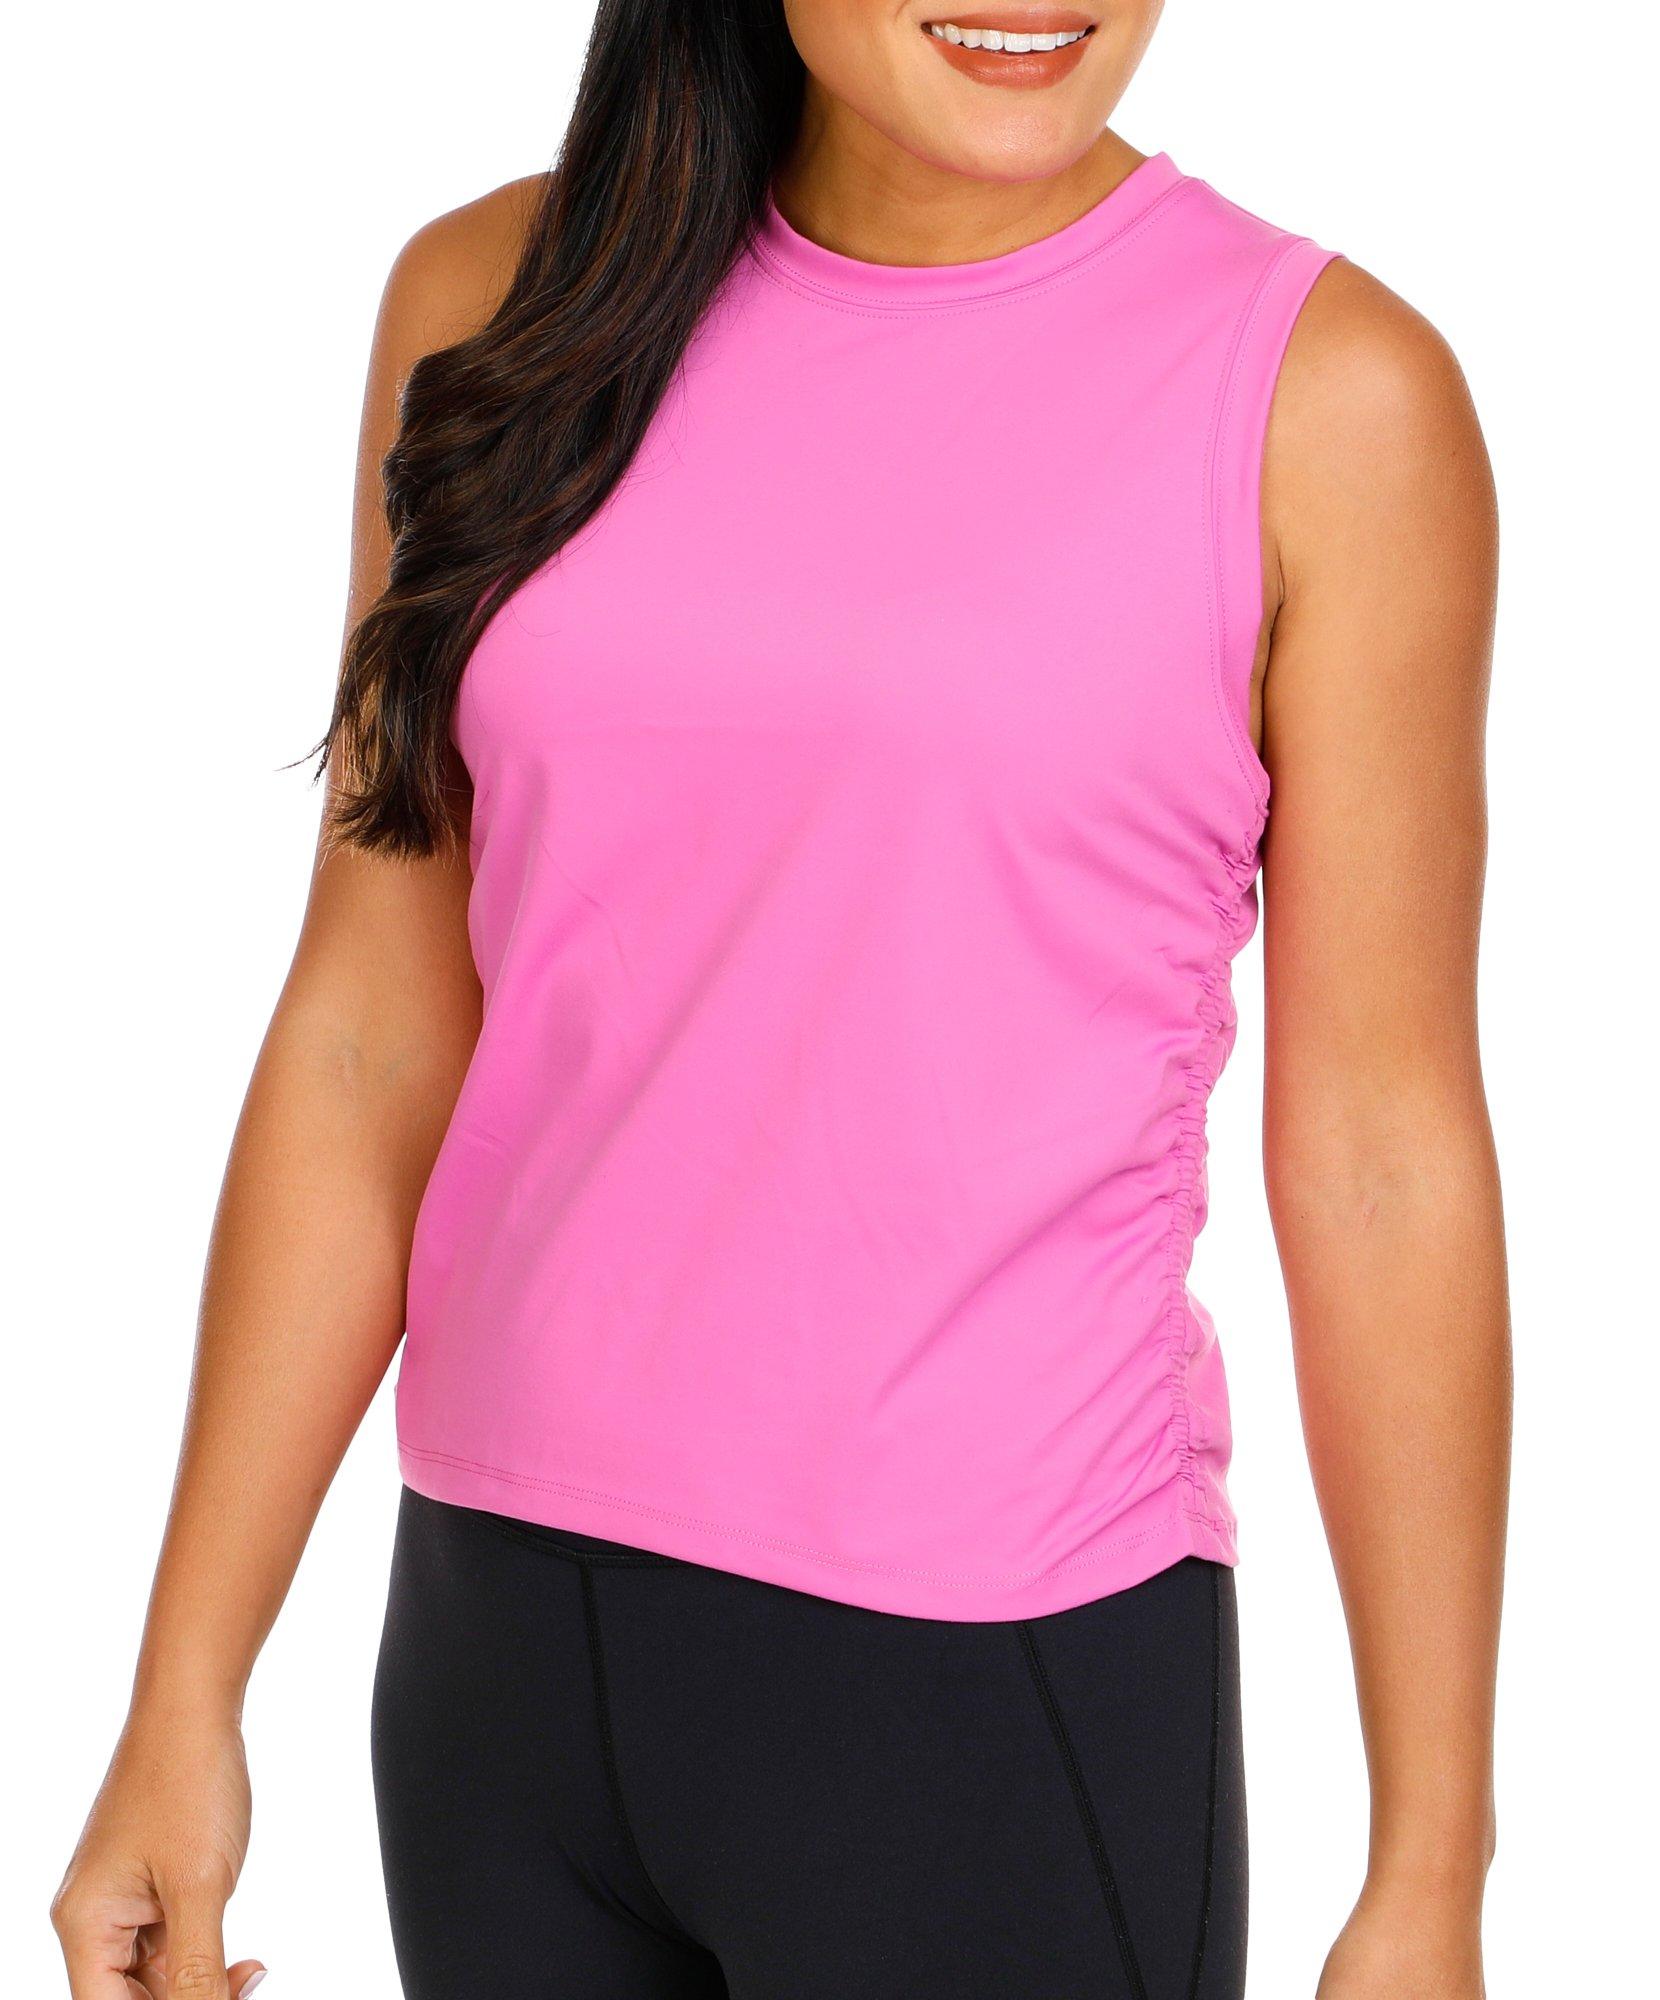 RBX Purple Activewear Tops for Women for sale